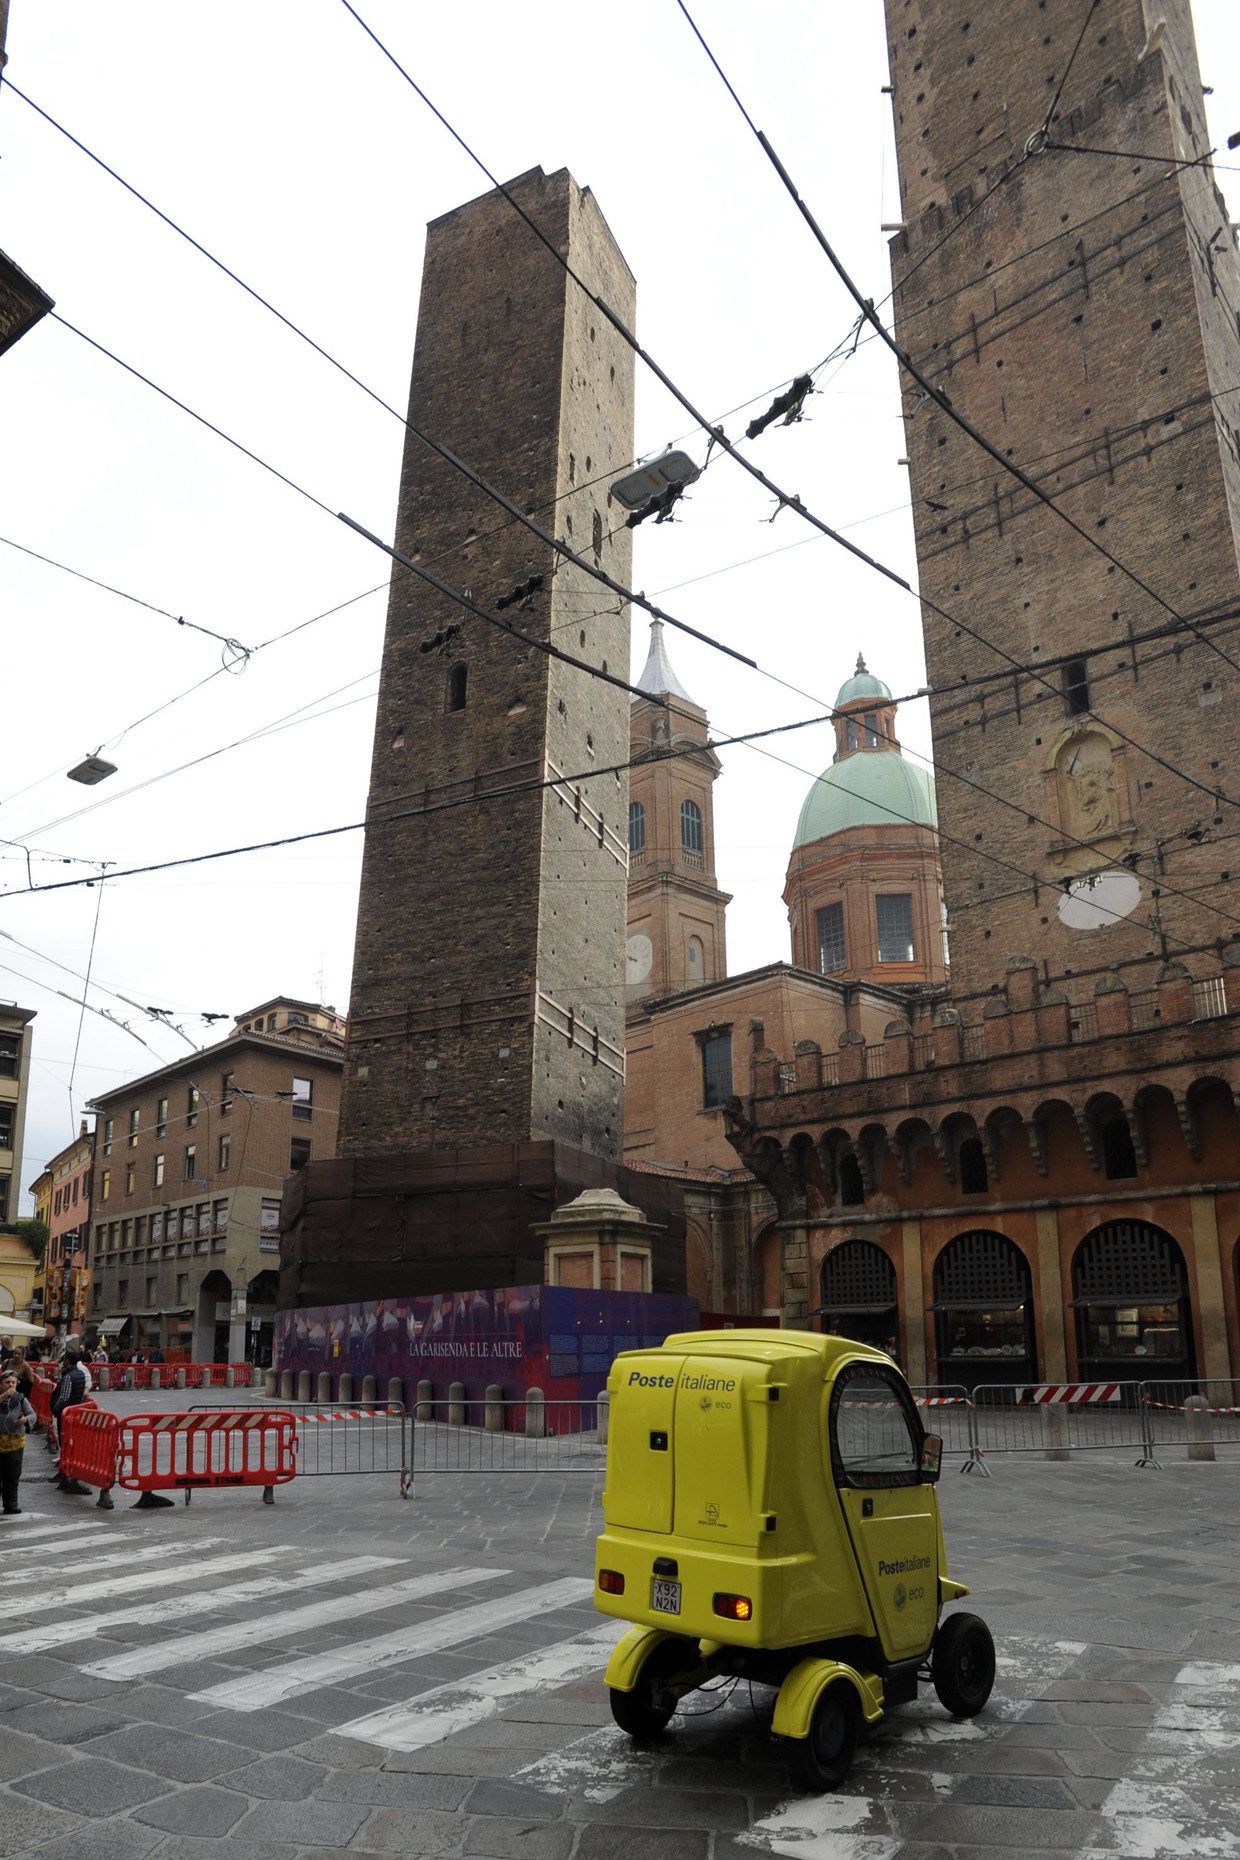 The square surrounding the tower is closed.  Picture news pictures